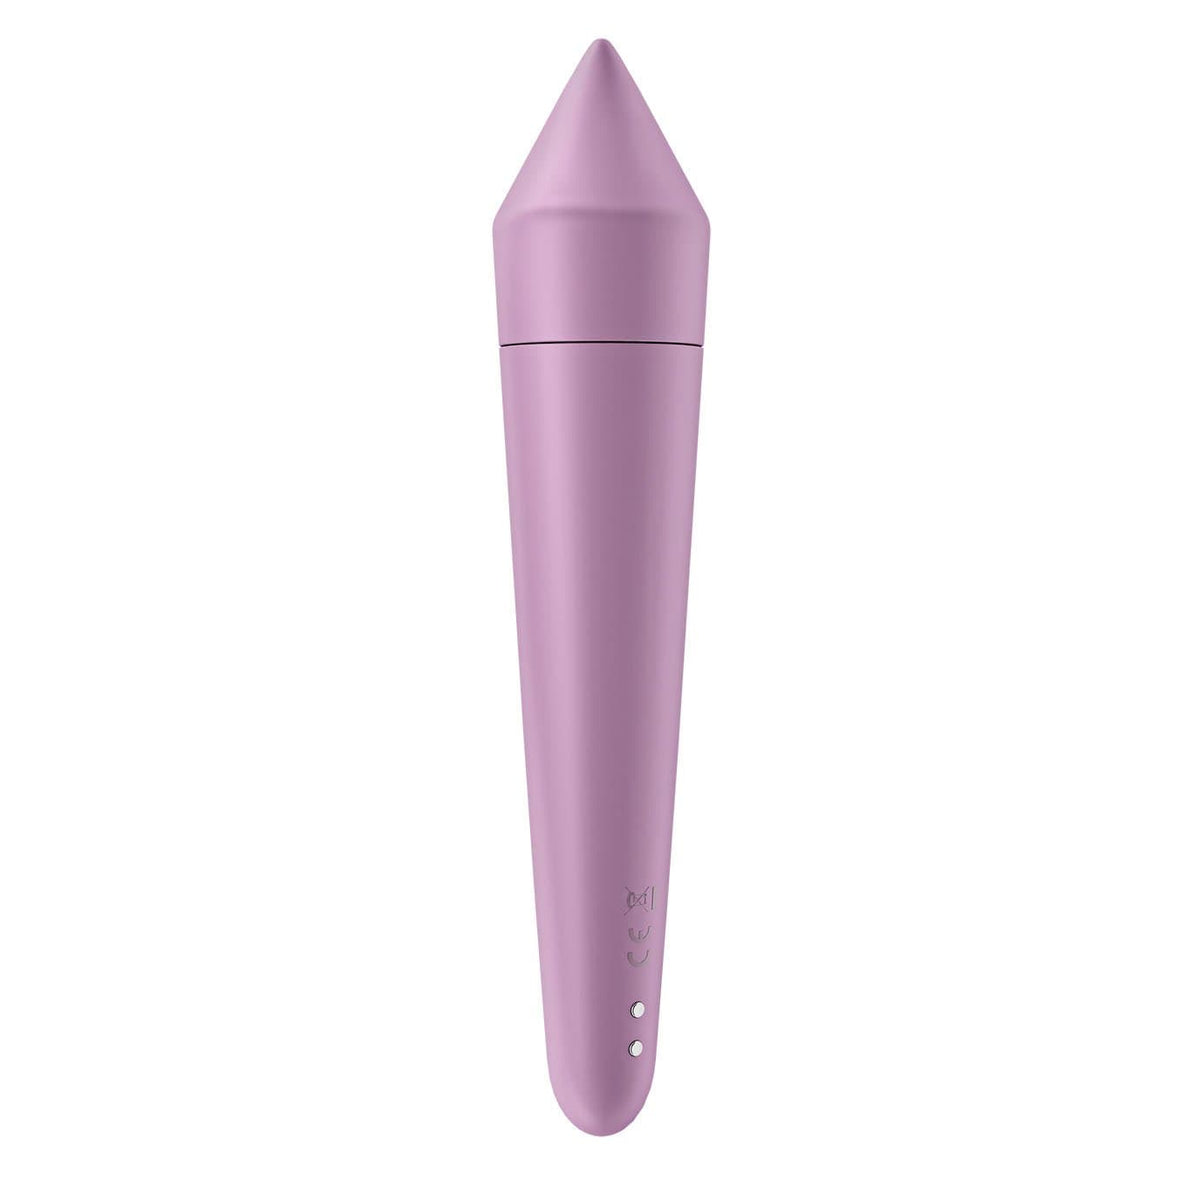 Satisfyer - Ultra Power Bullet 8 Vibrator with Bluetooth and App CherryAffairs